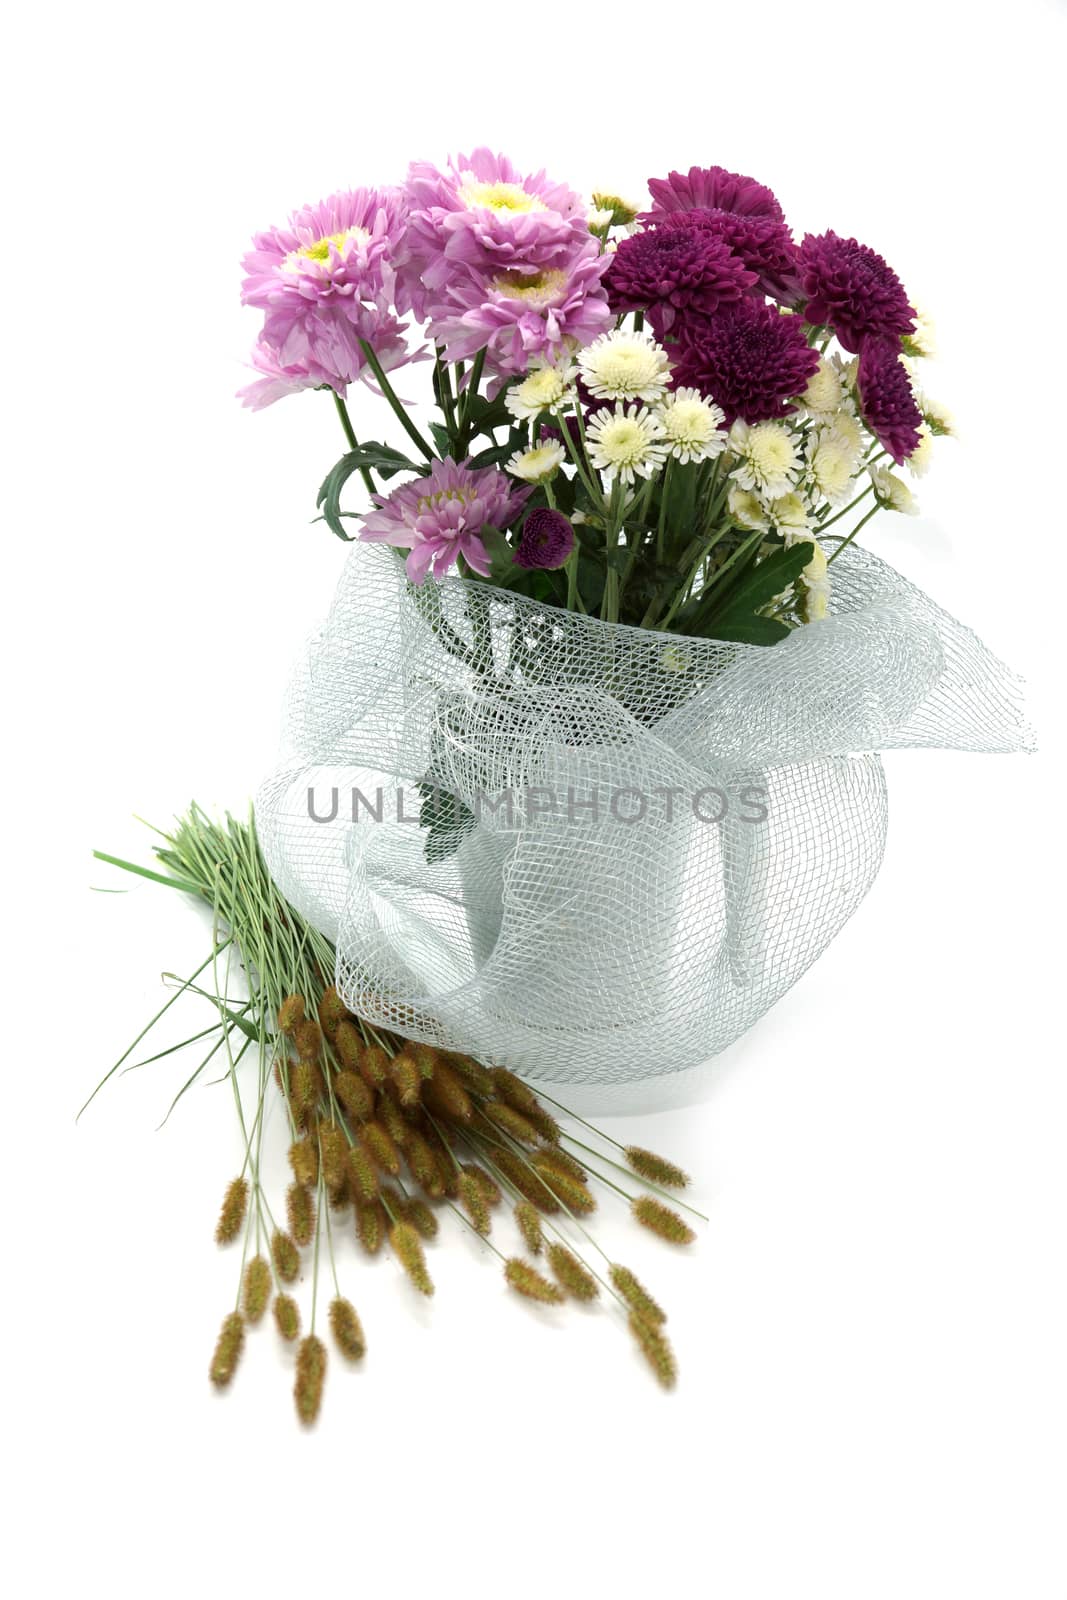 Bouquet of flowers on white background by Noppharat_th